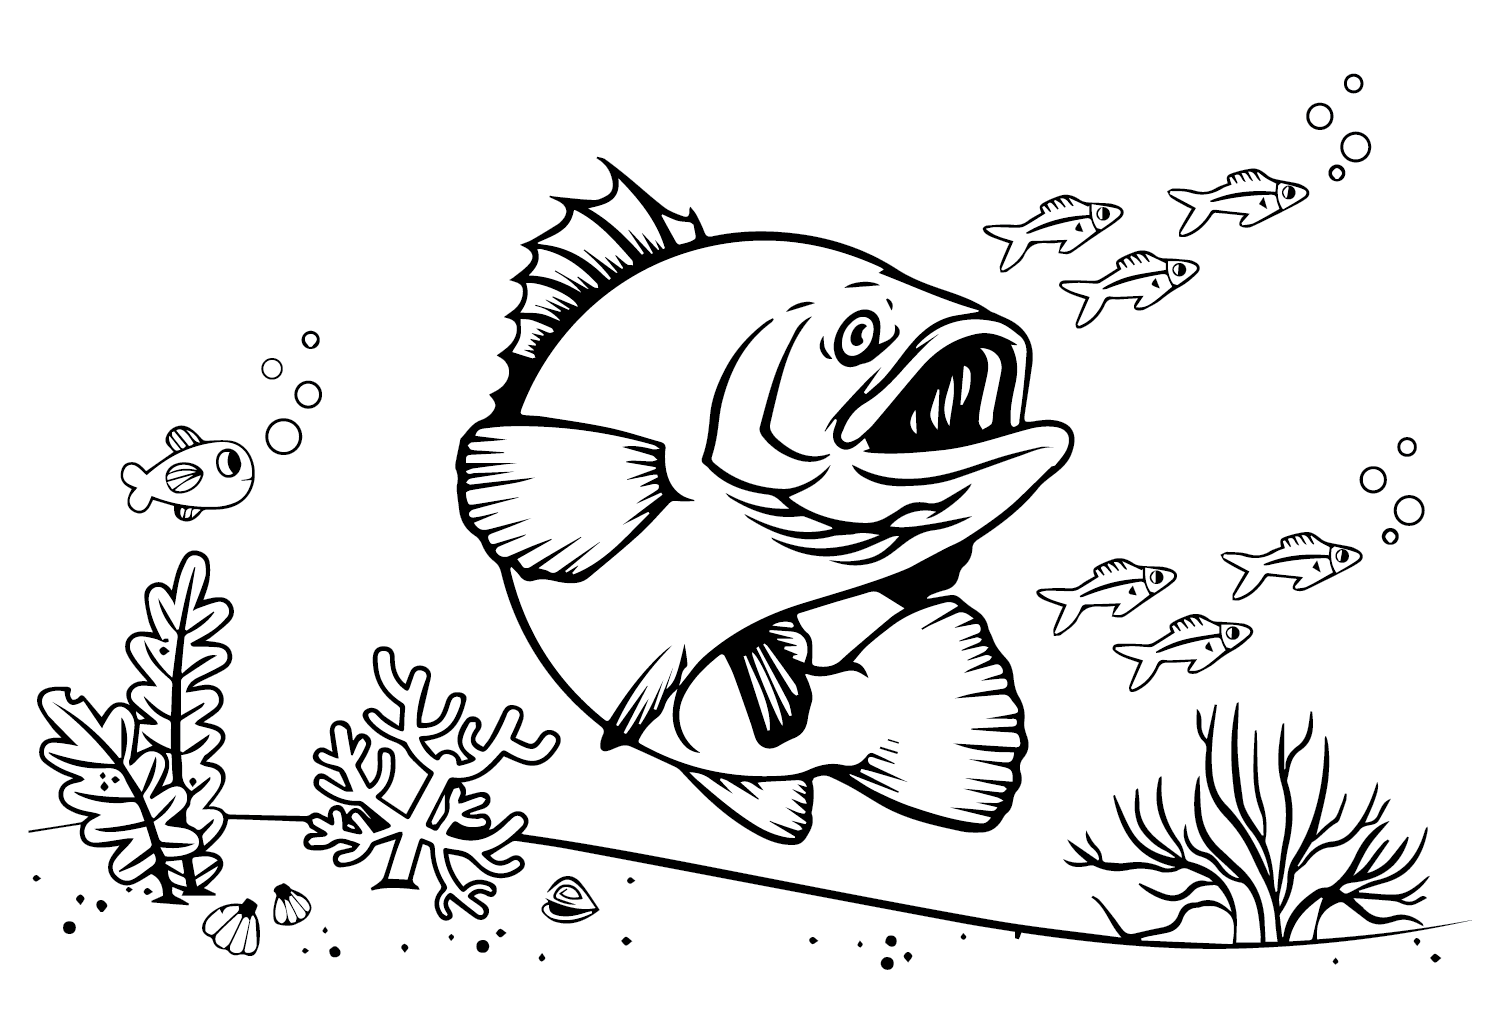 Grouper Drawing from Grouper